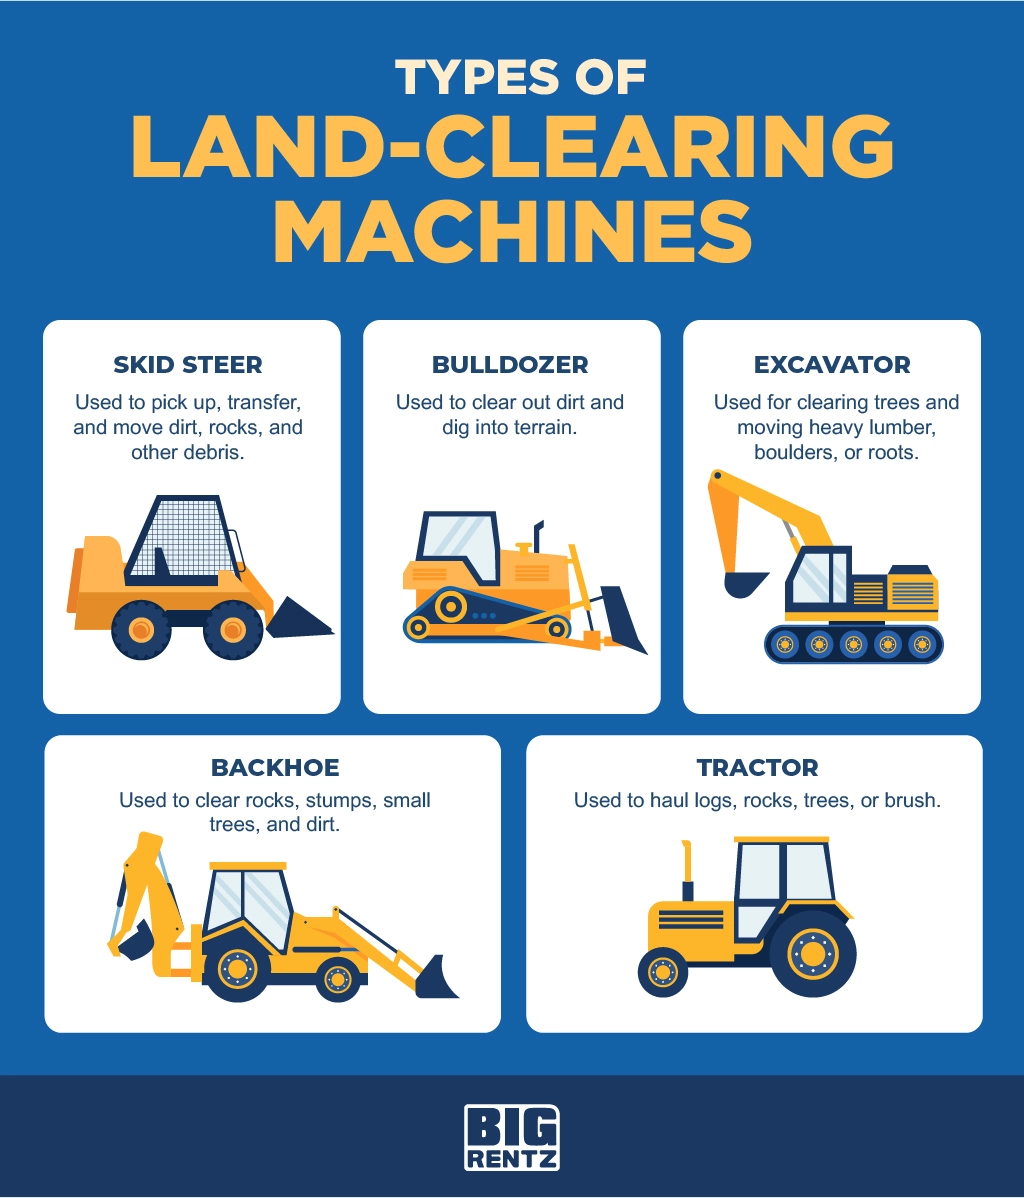 Land Clearing Best Equipment: Quality Matters